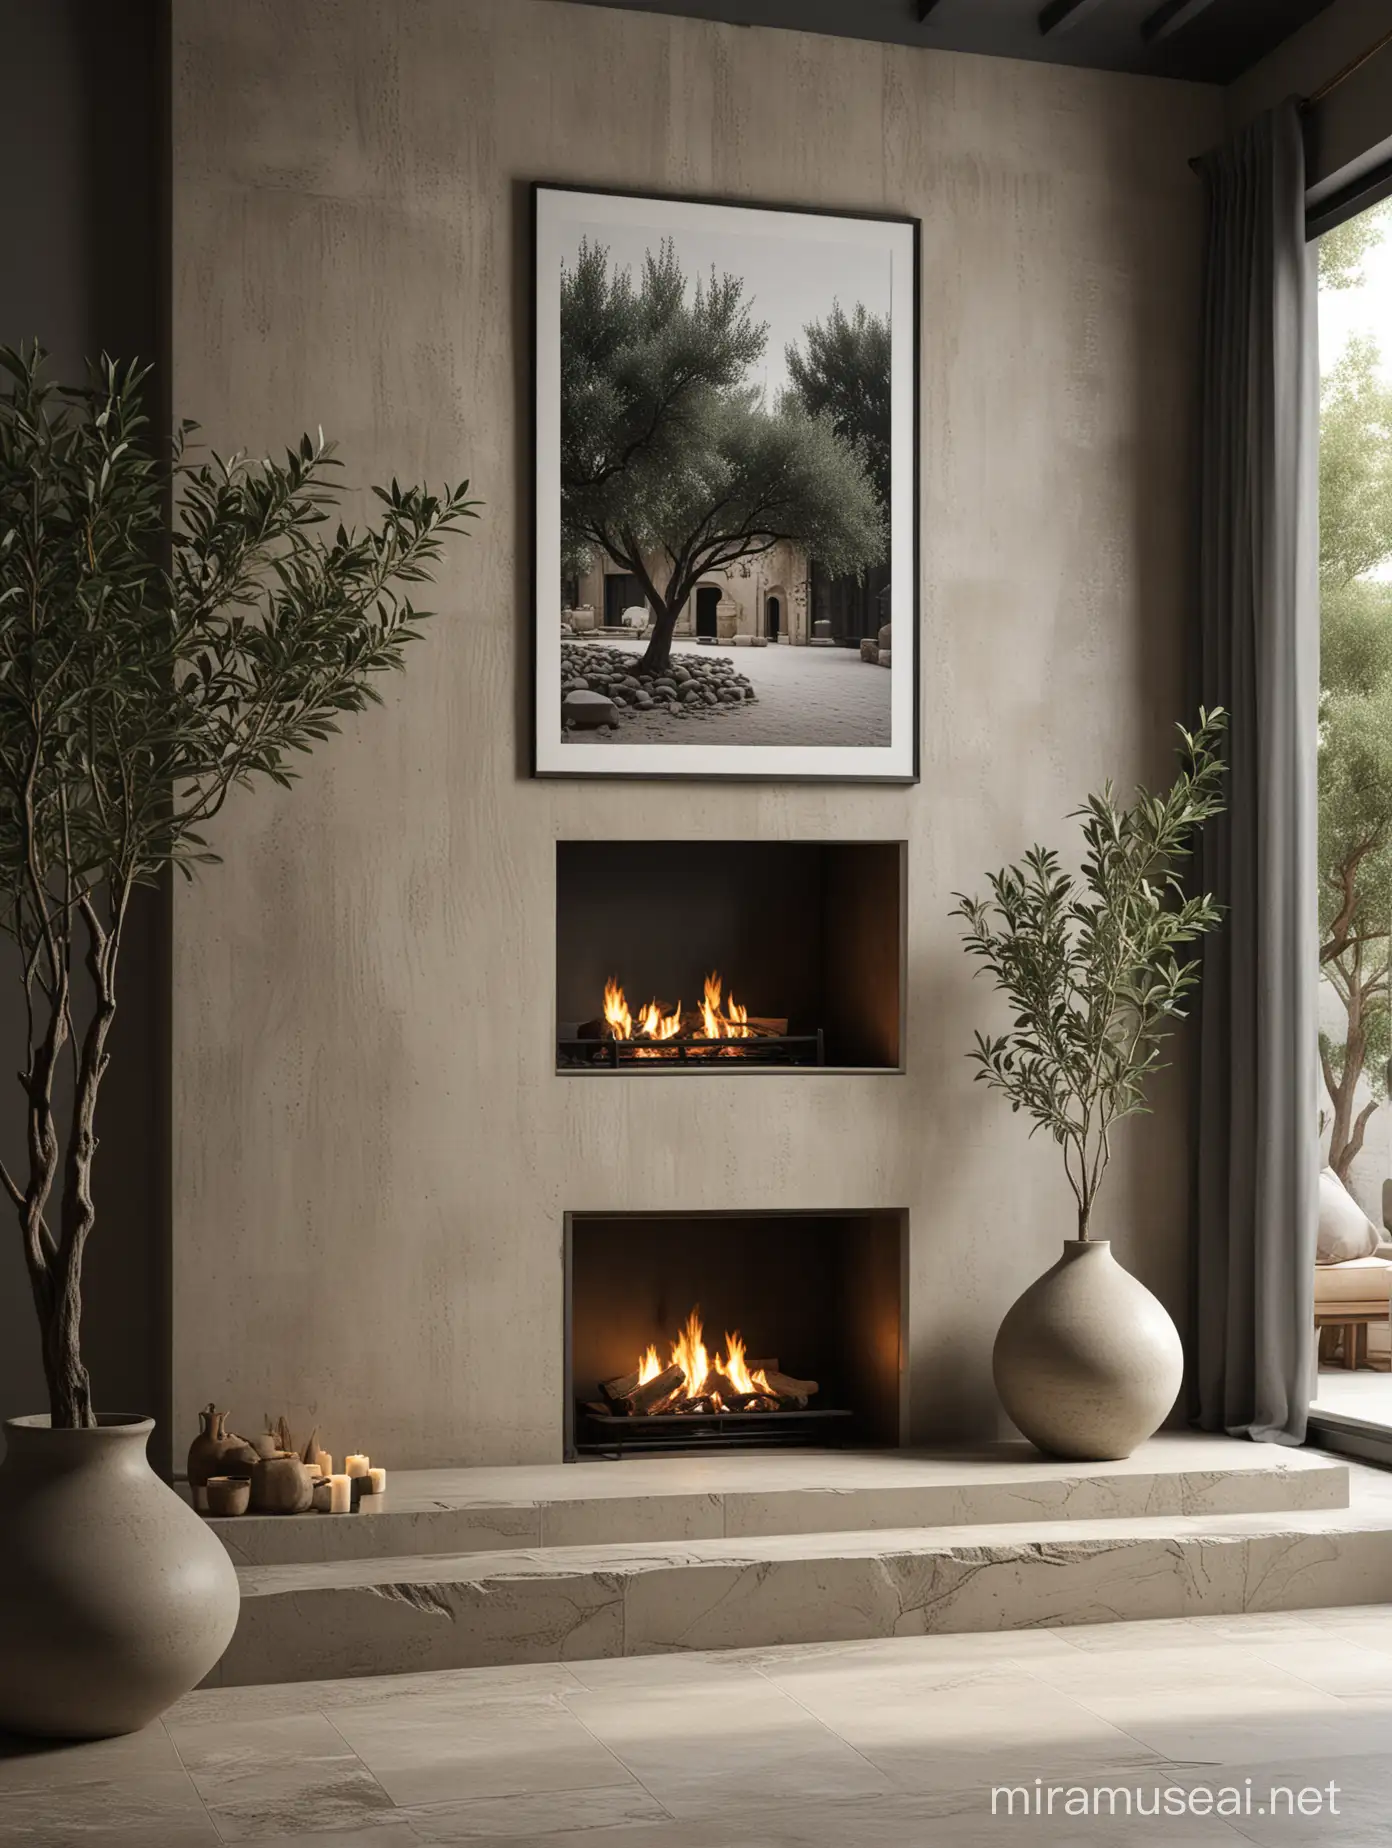 A gorgeous dark academia contemporary close up black framed black poster mockup with a minimal but rustic interior design grey wall with huge stone elements, including a contemporary fireplace with a Wabi Sabi huge vase in white sand finish as decoration with olive trees, huge windows in the magazine style of ARCHITECTURAL DIGEST, a high quality architectural visualization, using 3D modeling software with photorealistic materials and advanced lighting techniques to showcase the intricate details and modern look of the room